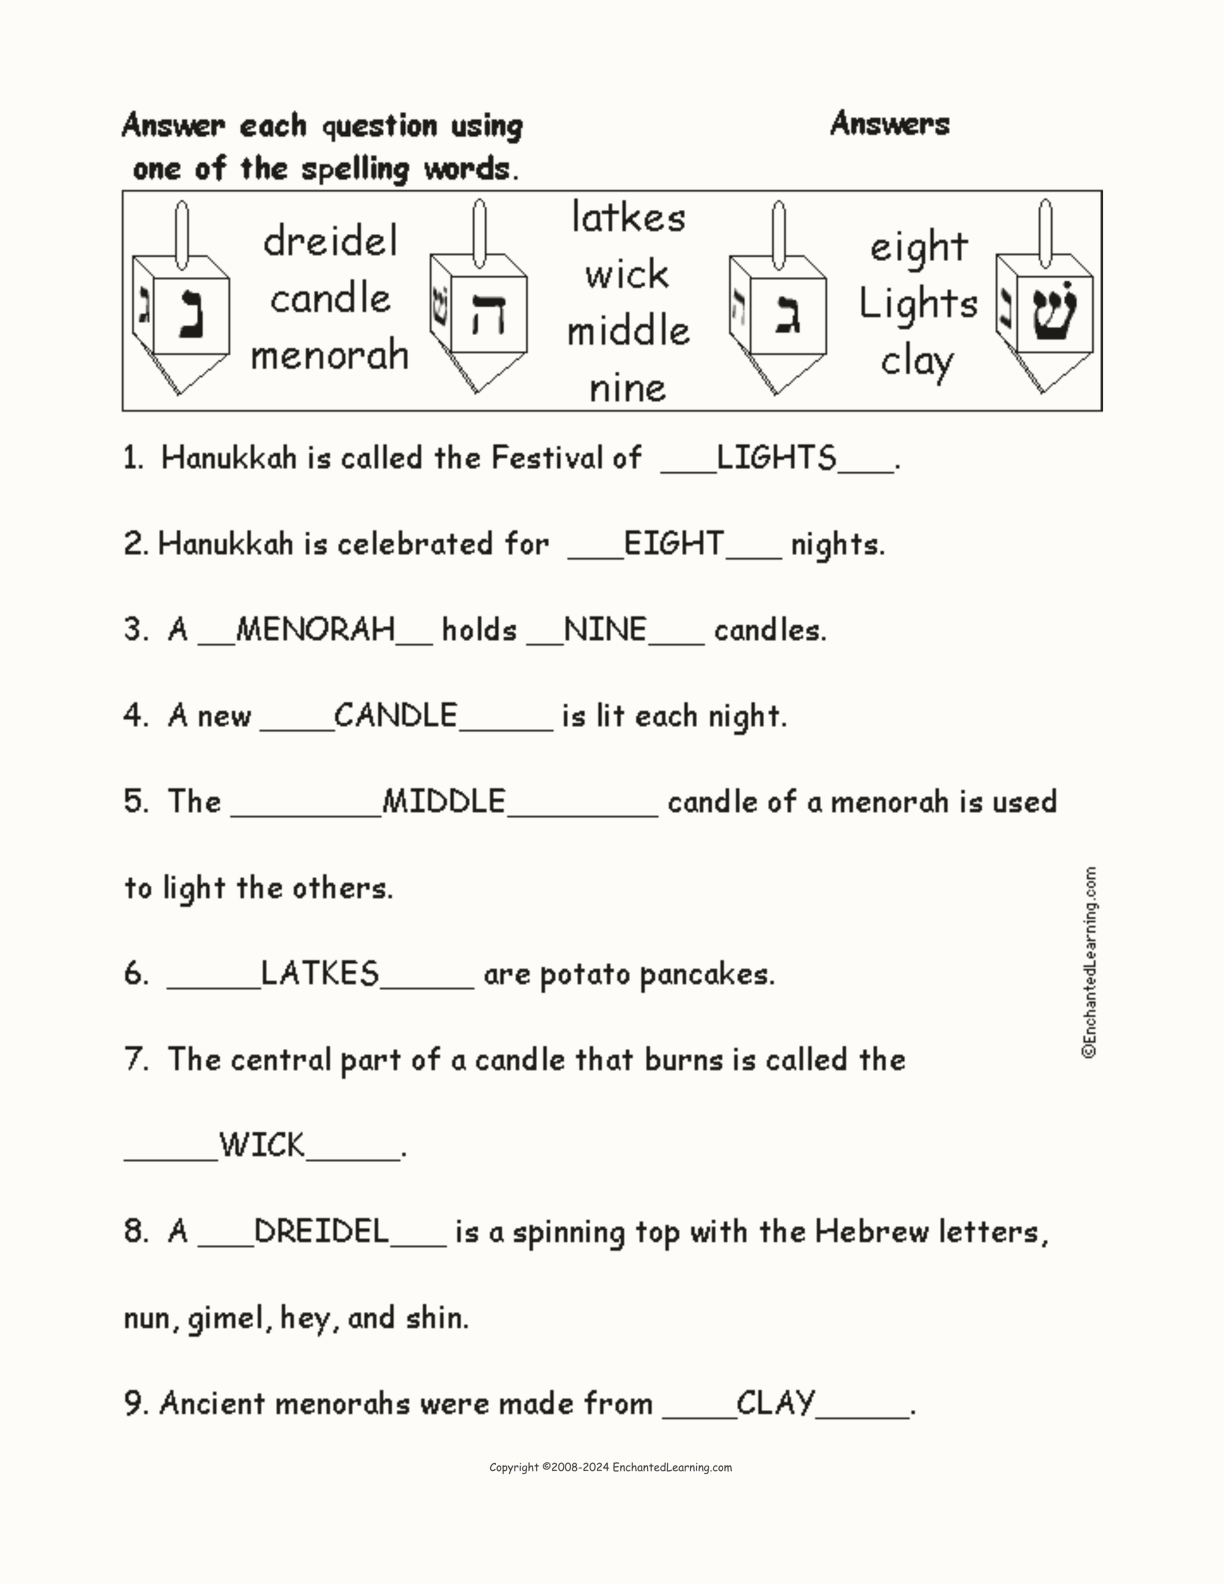 Hannukah: Spelling Word Questions interactive worksheet page 2